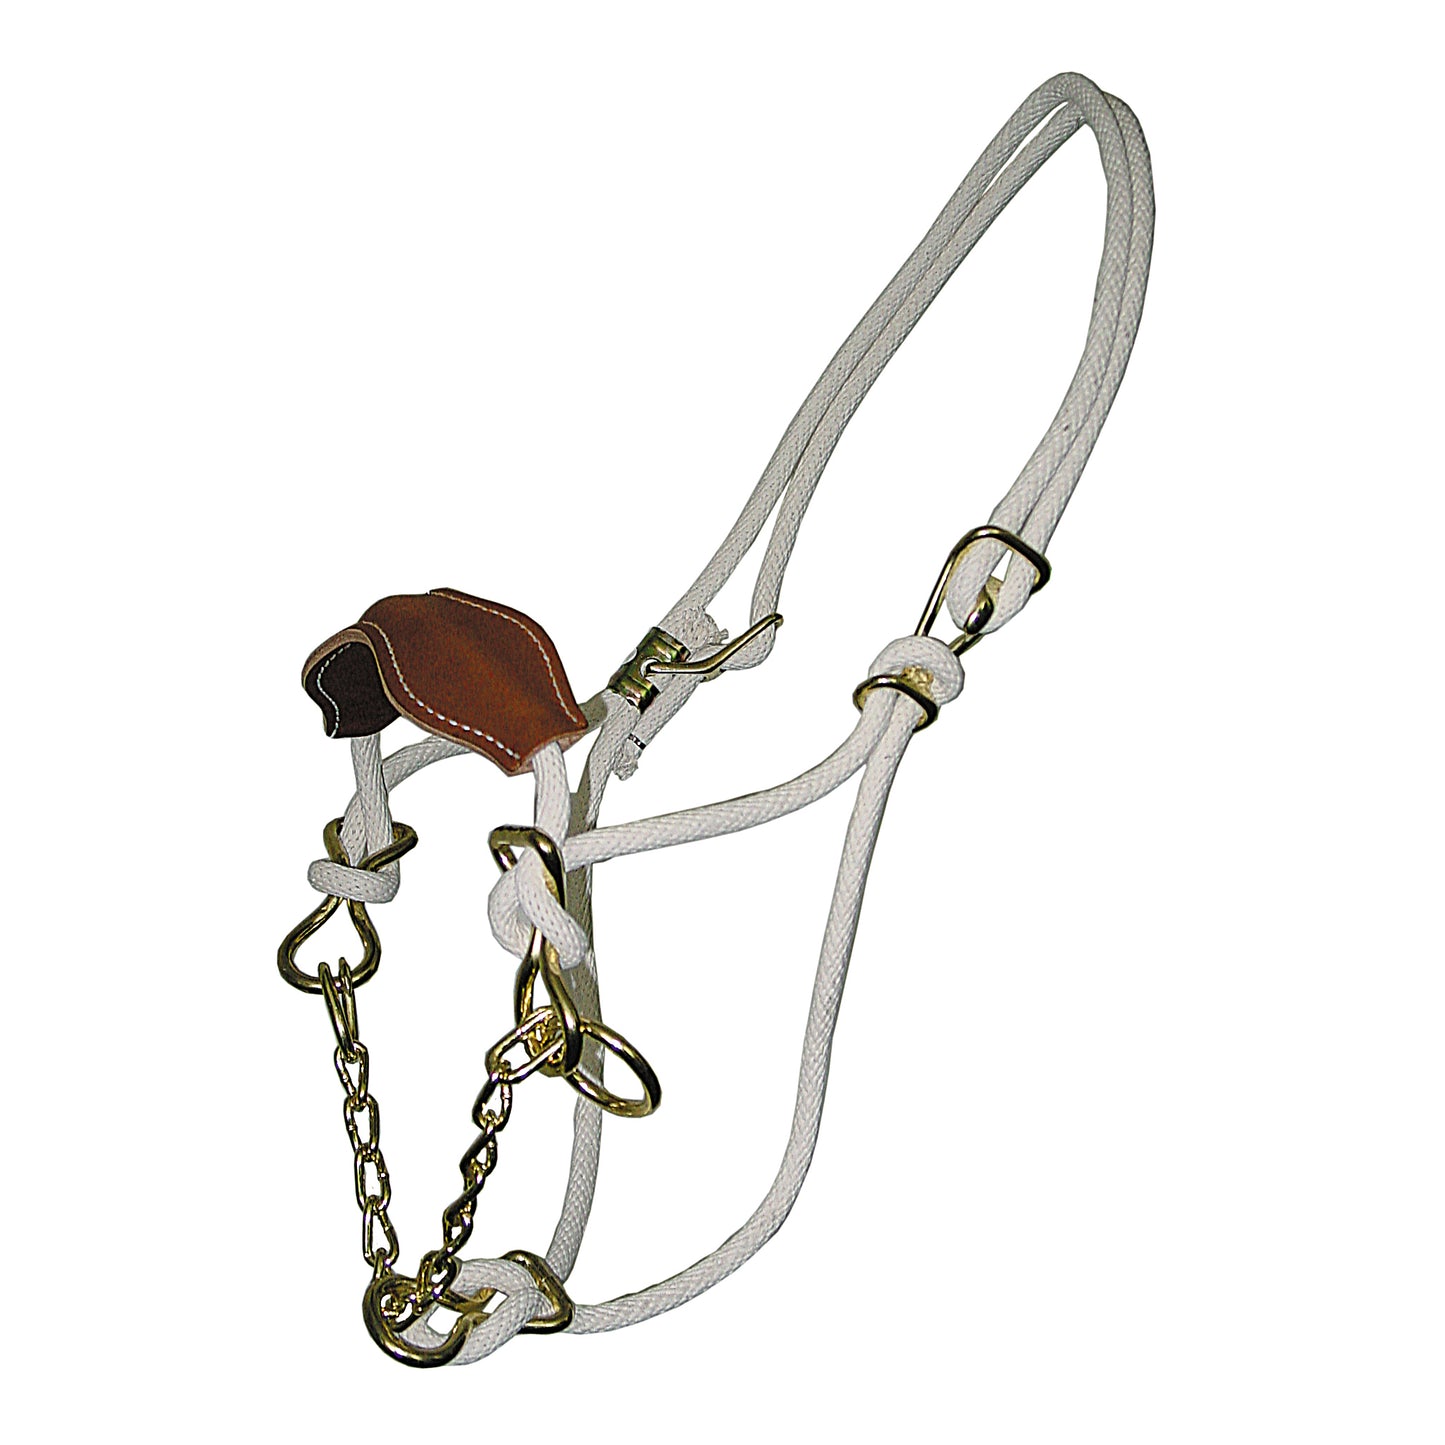 Cotton Cow Halter with Leather Noseband & Chain